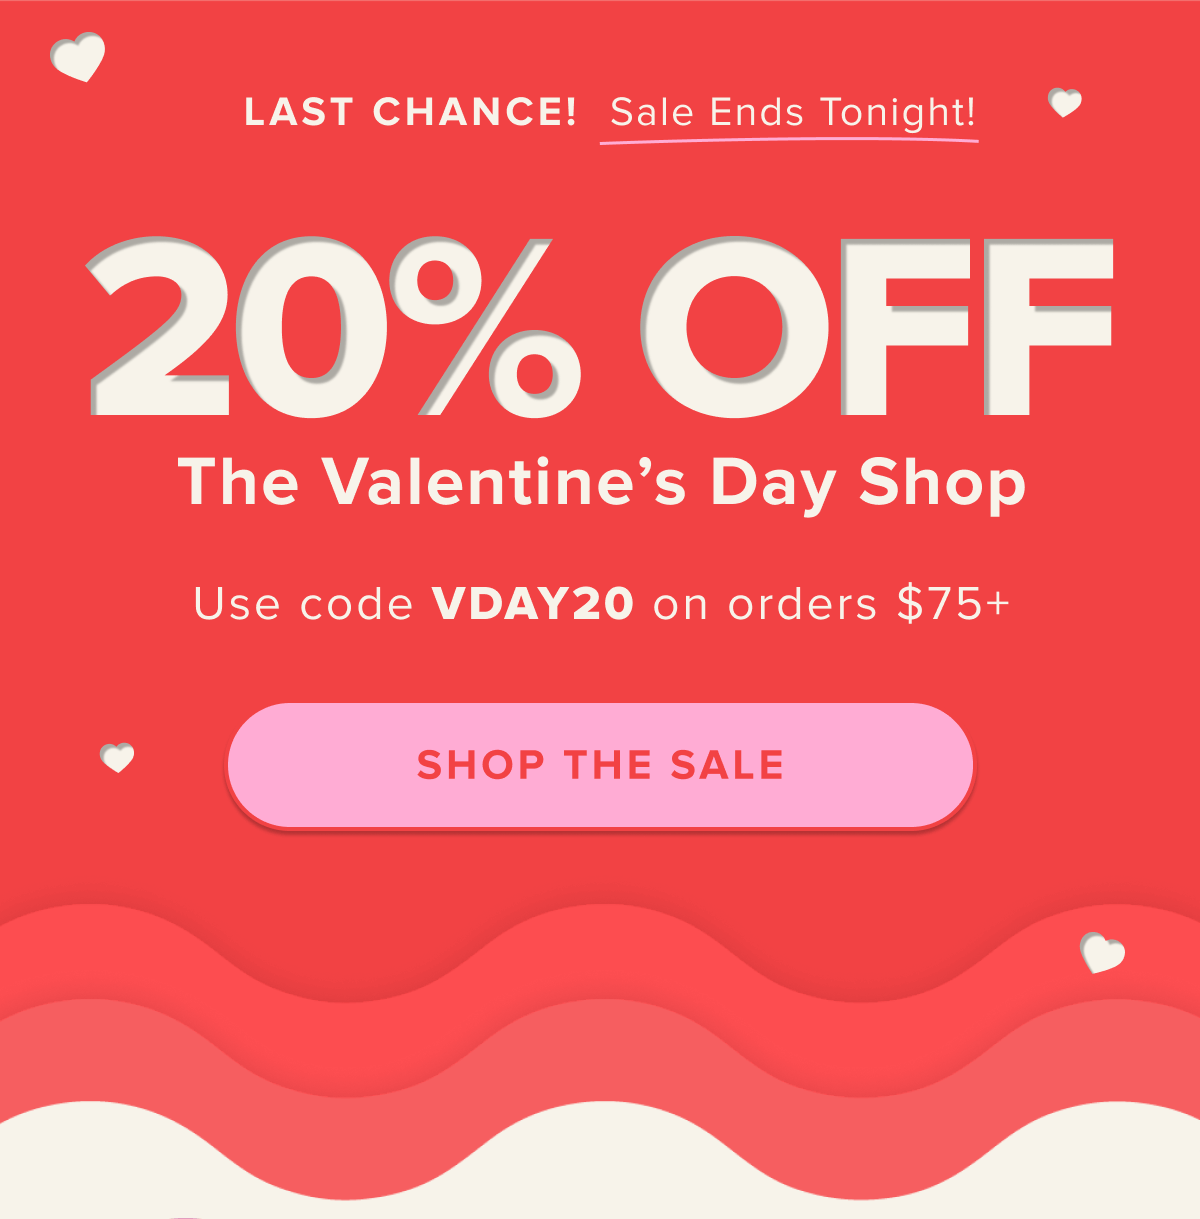 20% OFF The Valentine's Day Shop